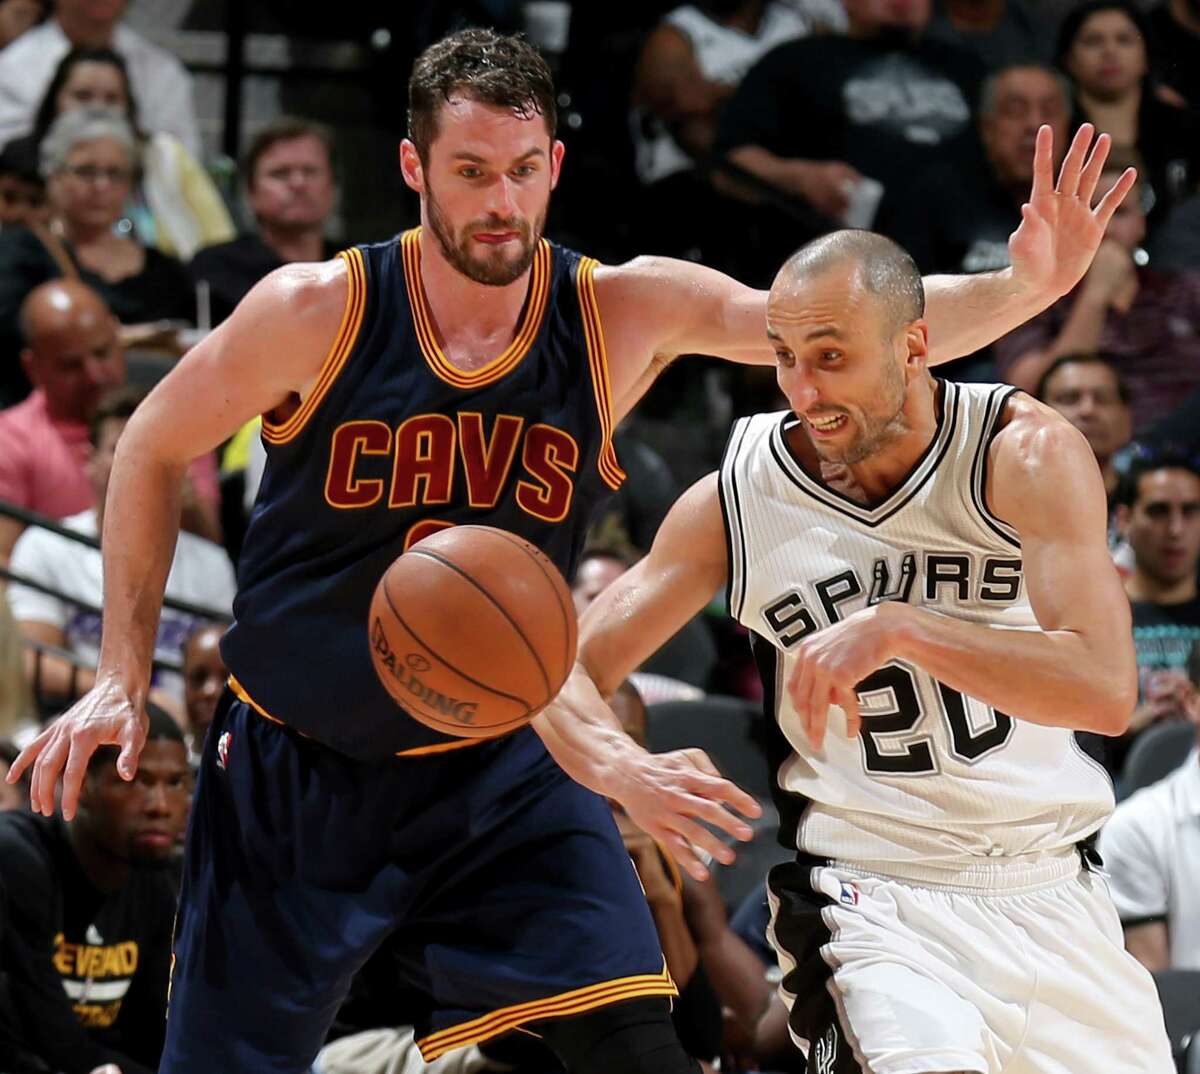 Cleveland Cavaliers' Kevin Love and San Antonio Spurs' Manu Ginobili chase after a loose ball during second half action Monday March 27, 2017 at the AT&T Center. The Spurs won 103-74.